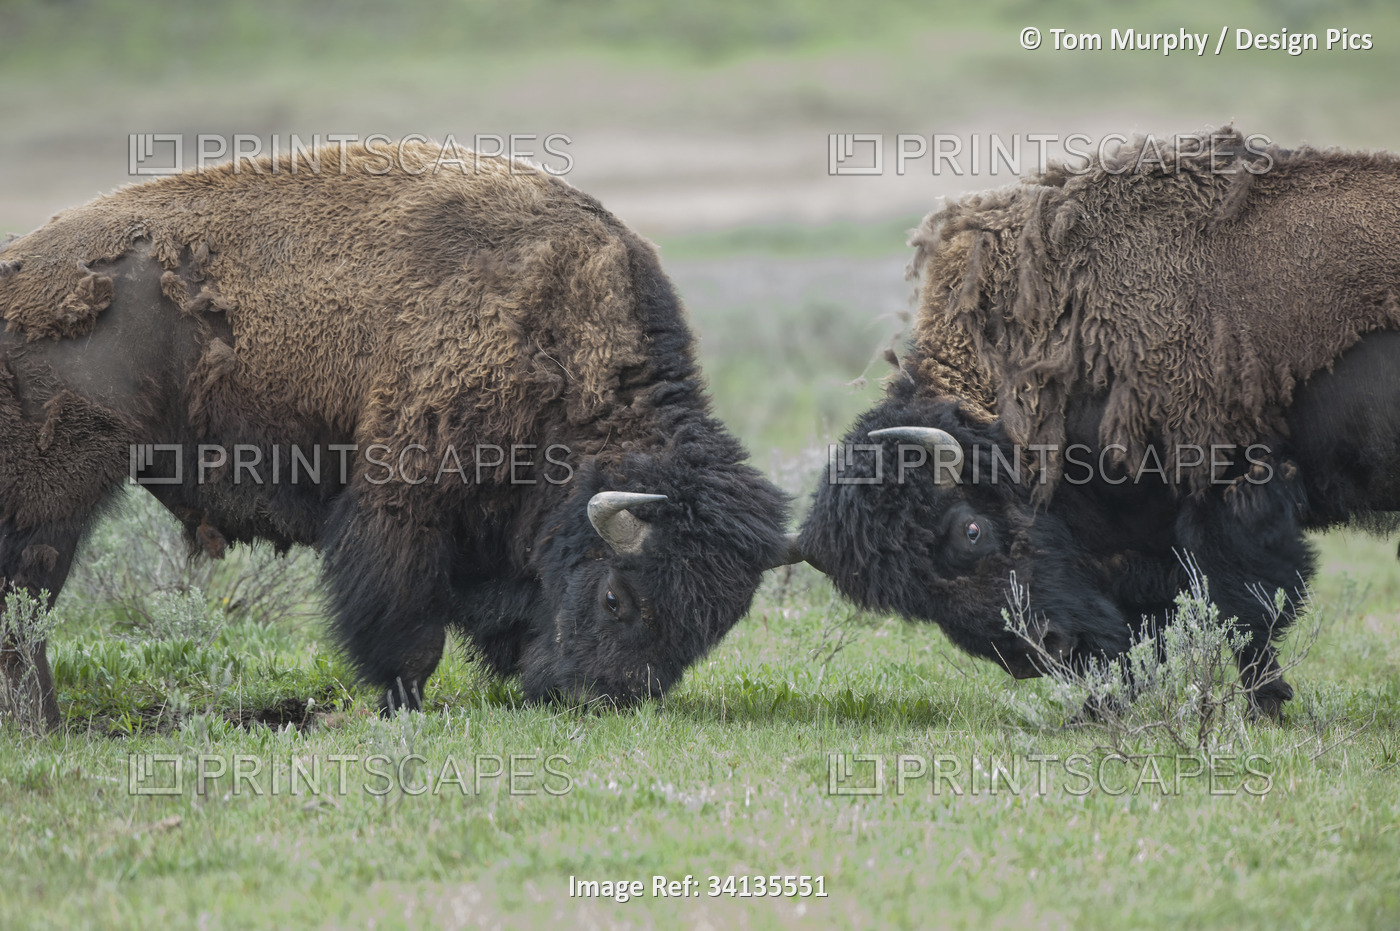 Two shedding Bison (Bison bison) butt heads in Yellowstone National Park; ...